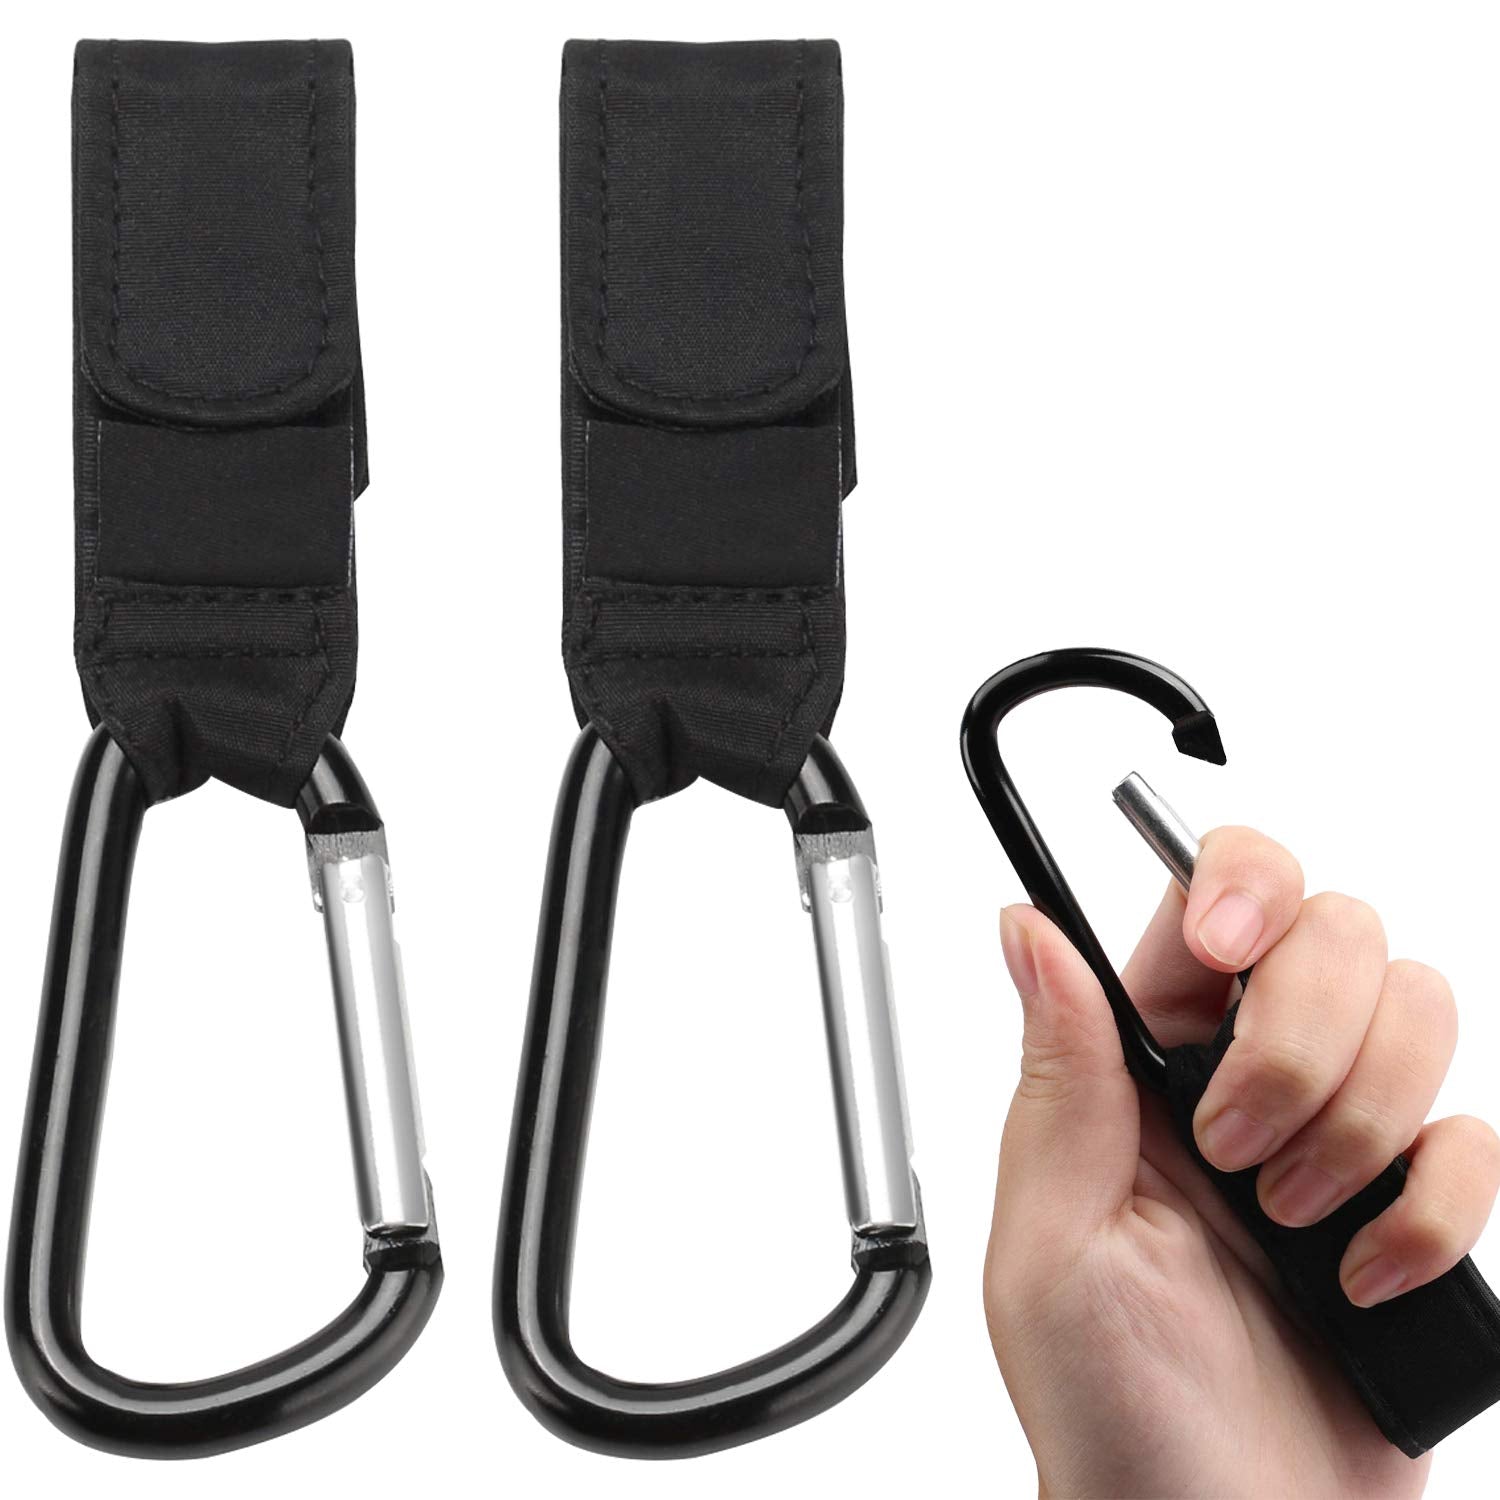 Baby Bag Clips Buggies Clips - Hook Your Shopping & Bags Safely on Your Pushchair or Stroller Clips. Pushchairs Clip Black, 2 Pack